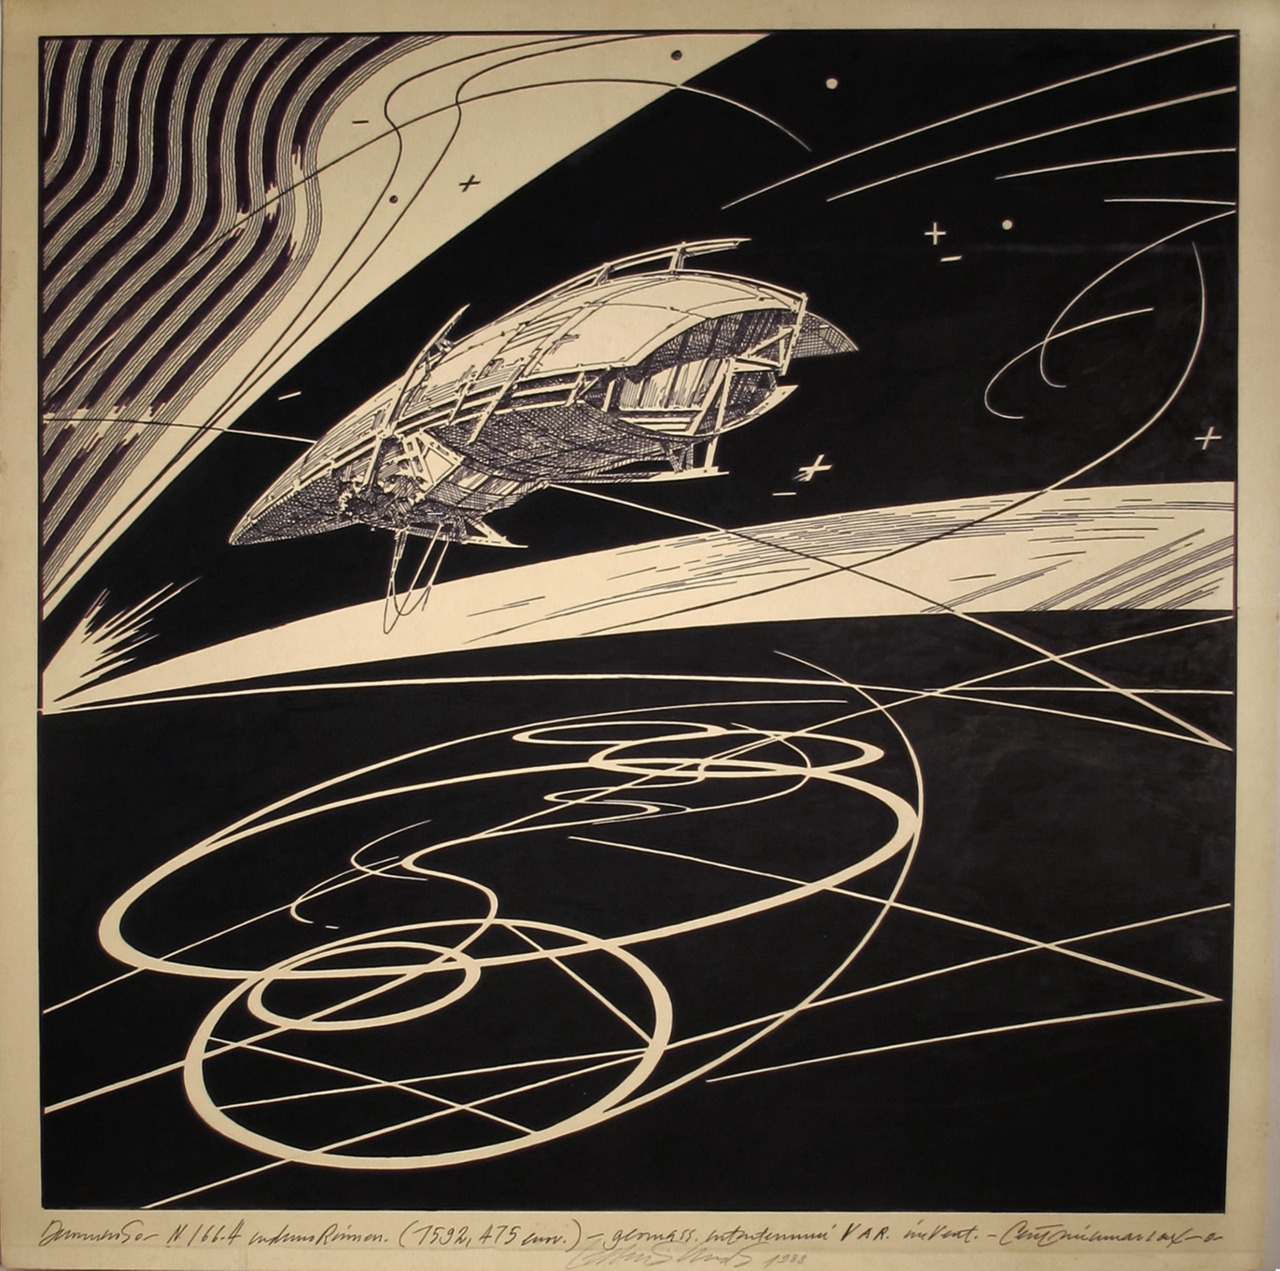 Space Oddity:
Geomagnetic Flying Machines (1988),by Lebbeus Woods, the Cooper Union professor of architecture and more, whose visionary fantastical futuristic Borgesian Piranesian early drawings are at Friedman Benda gallery in Chelsea. Catch the...